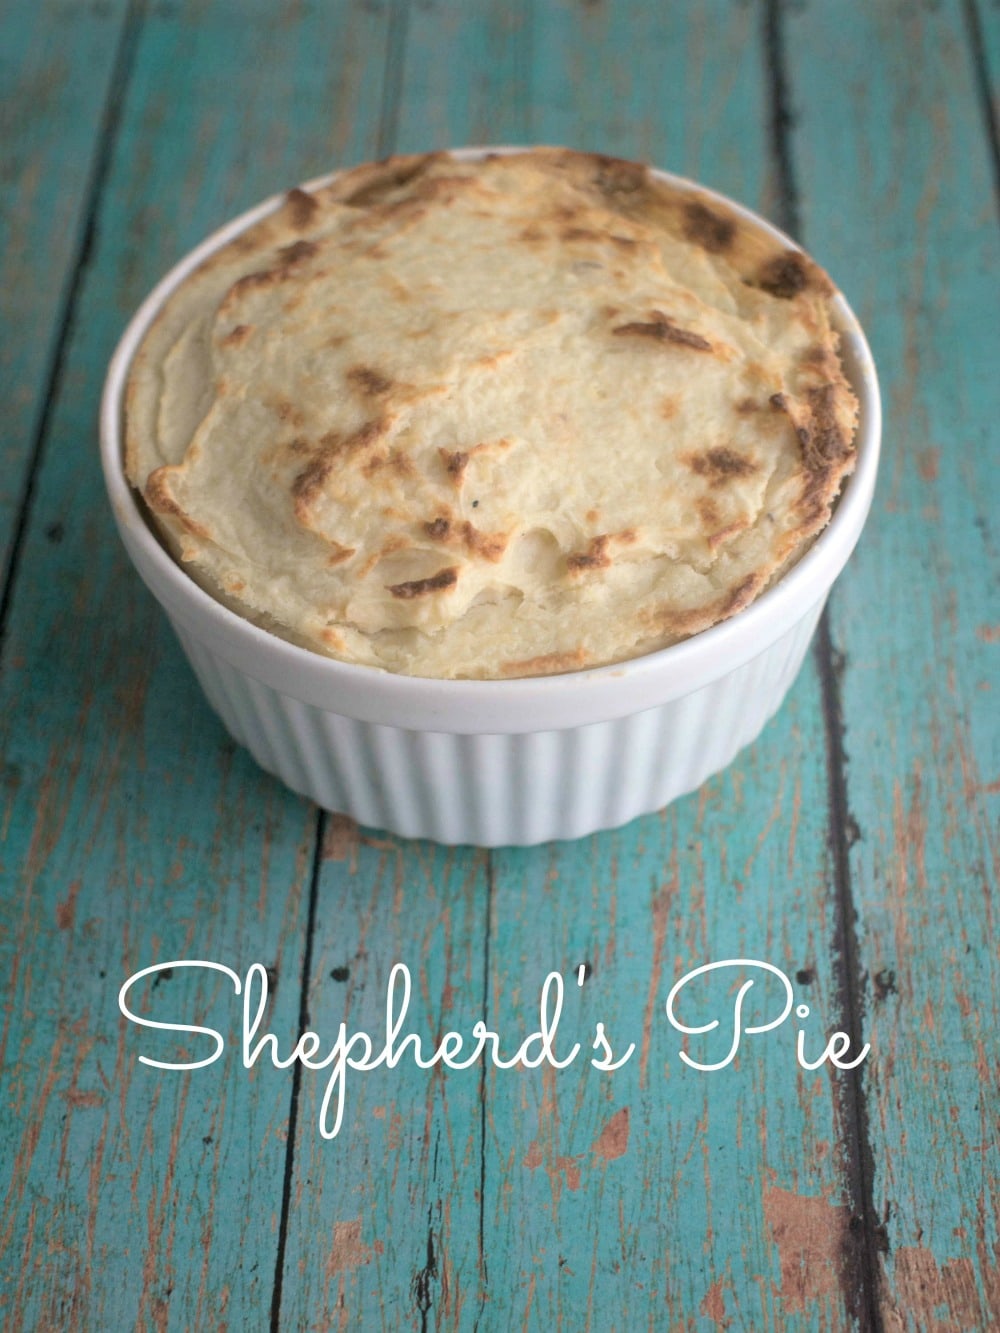 Shepherd's pie in a white bowl on a wooden table.